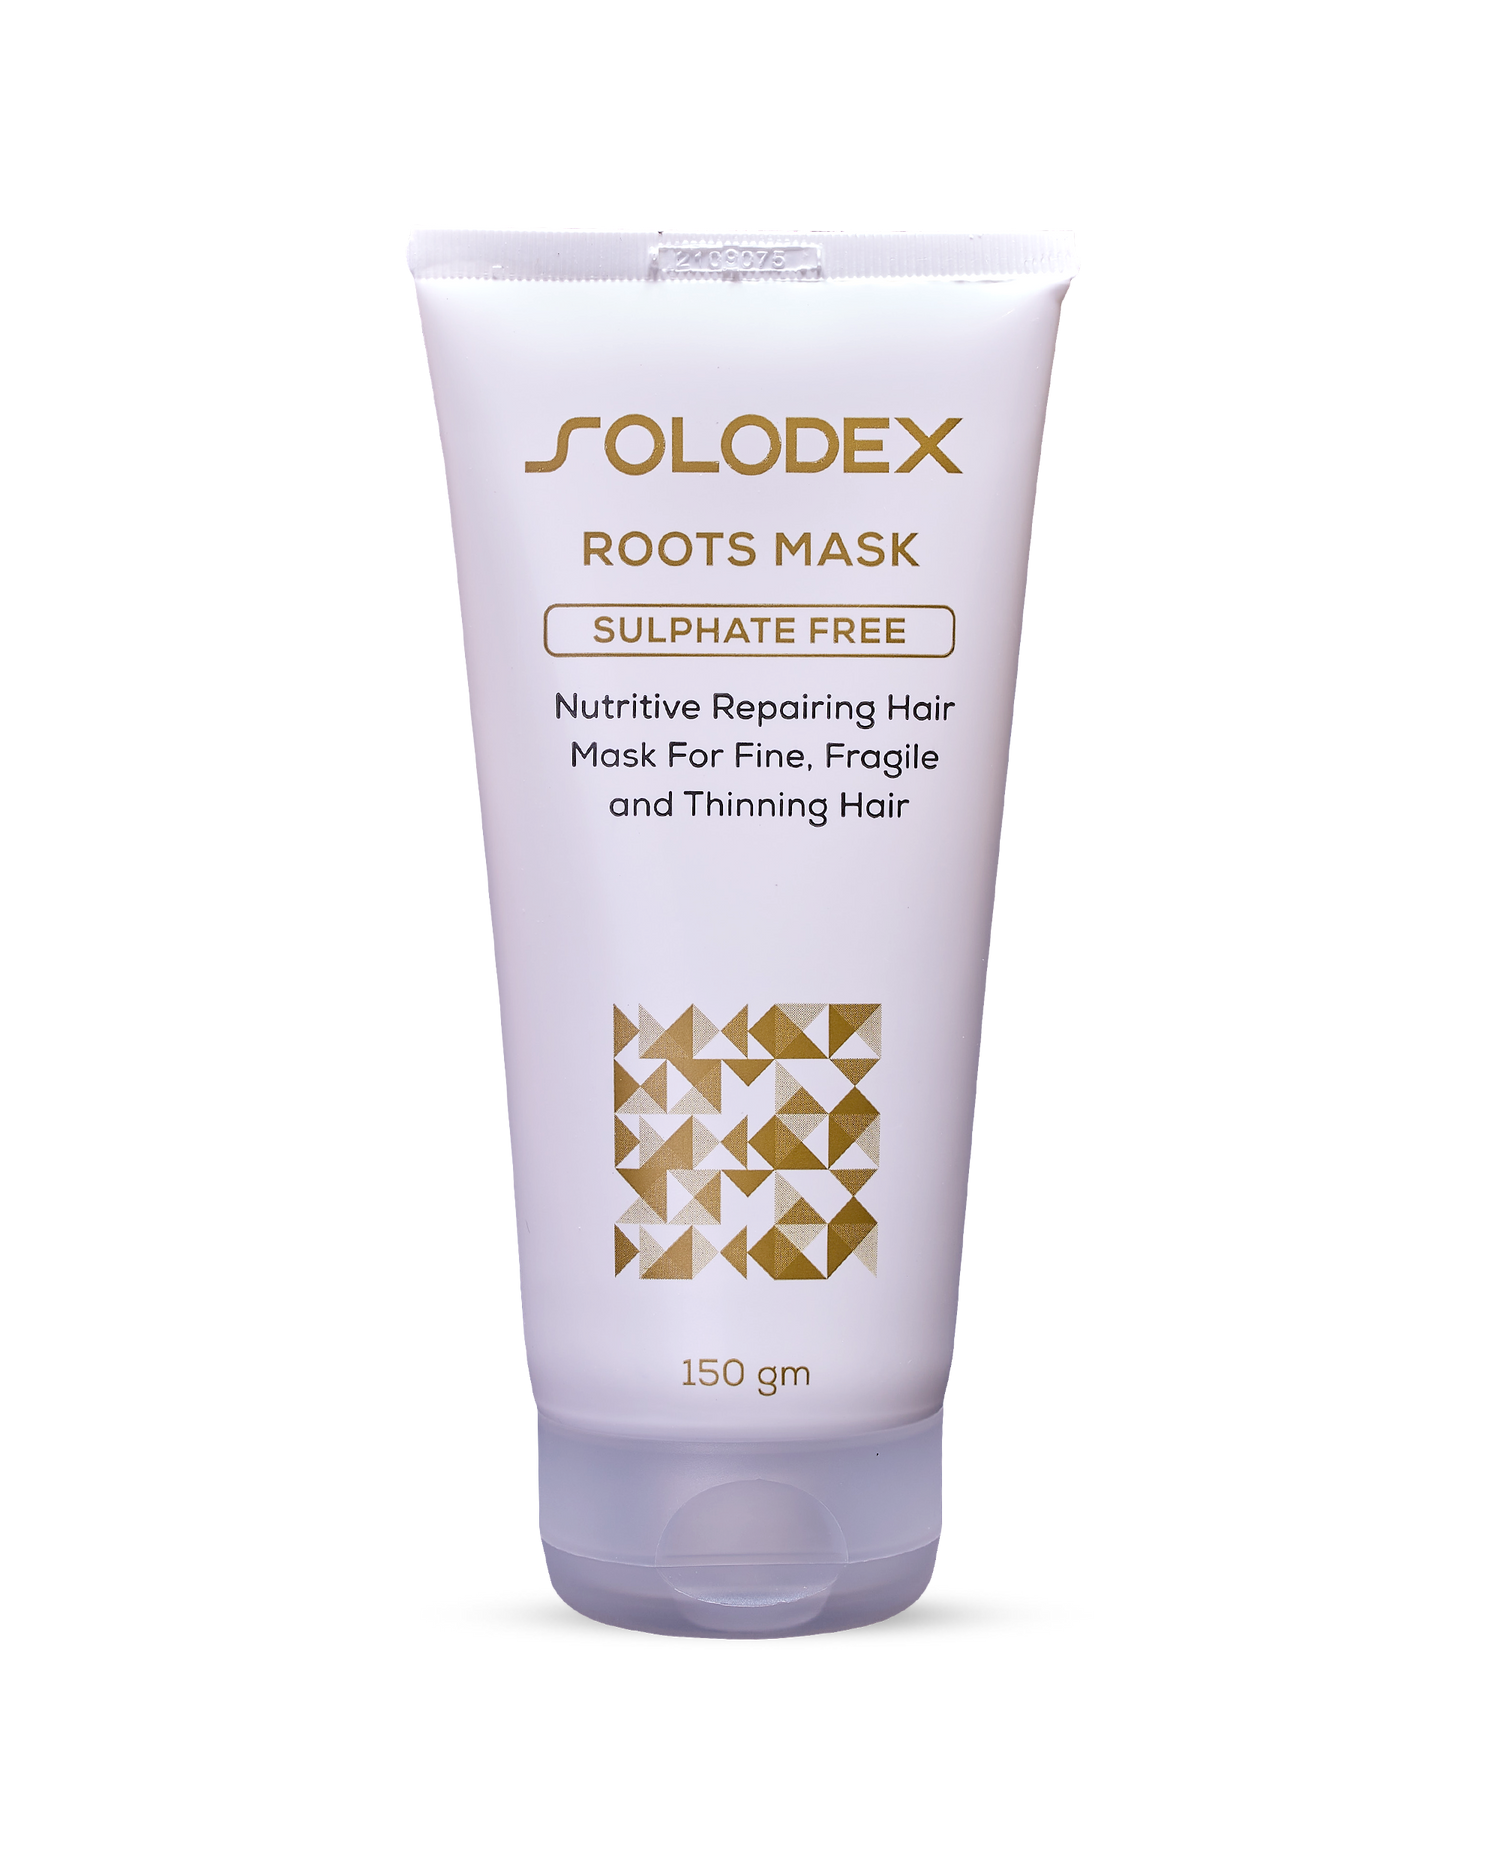 Solodex Roots Mask 150 gm